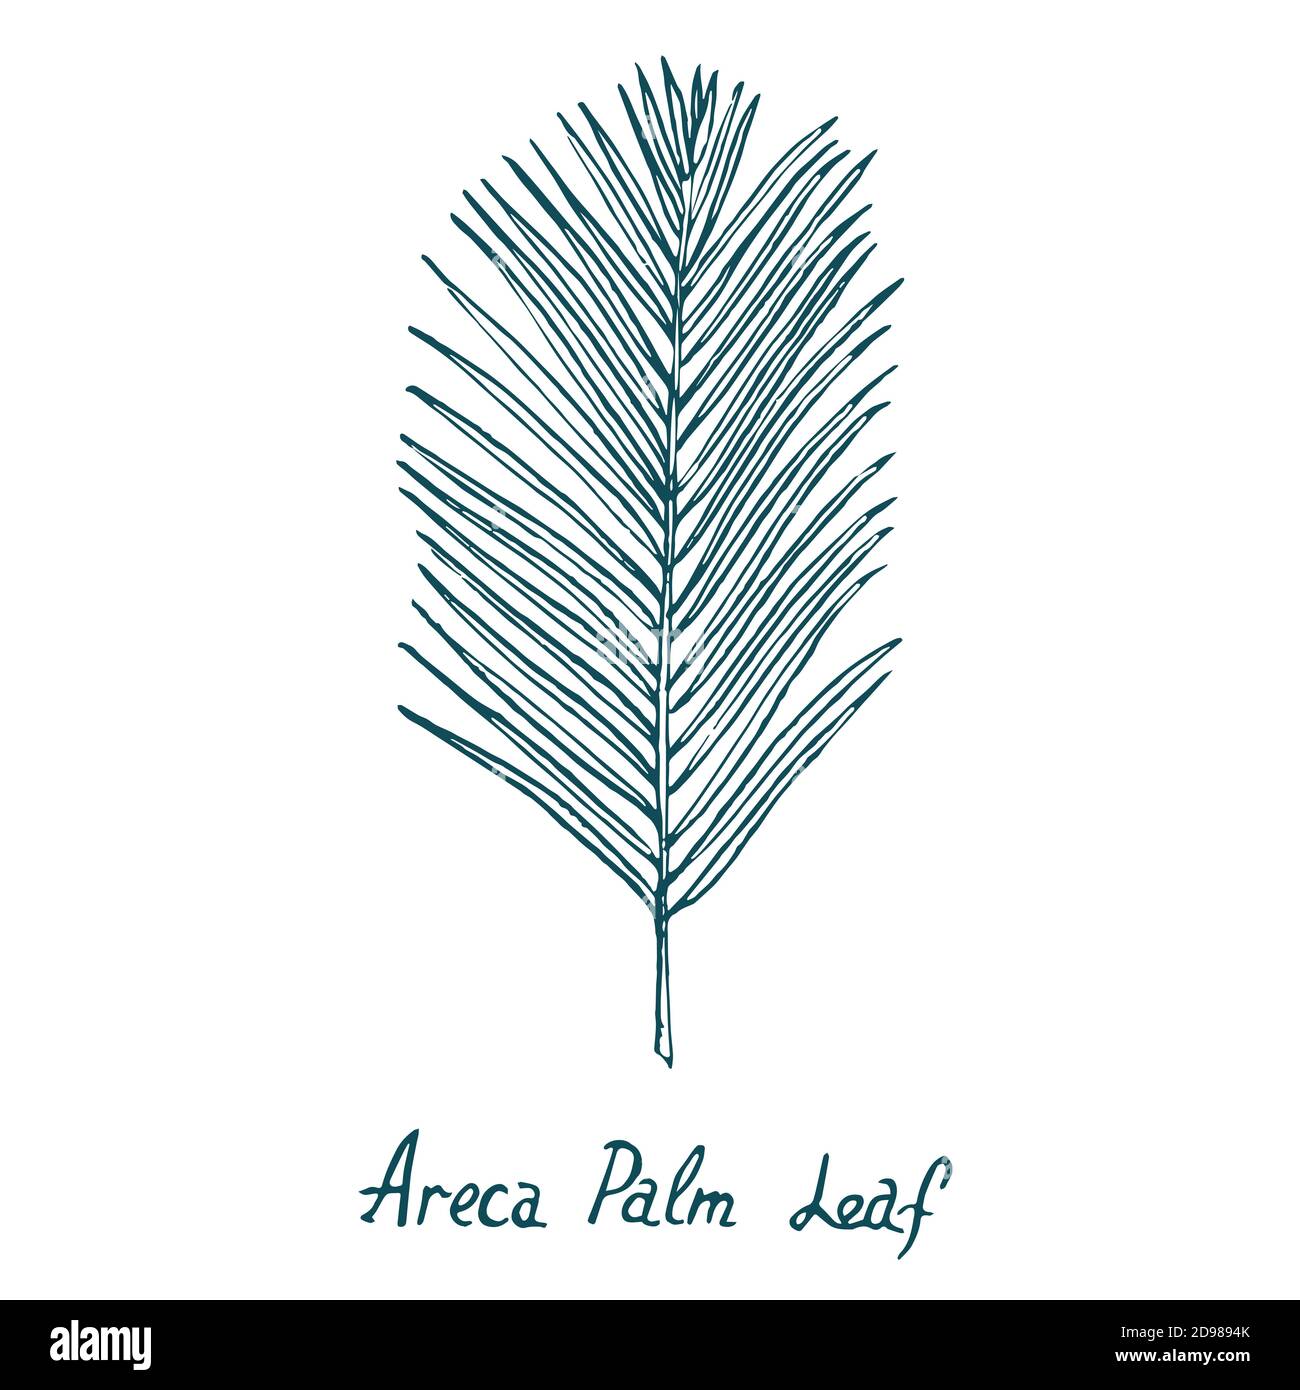 Areca Palm Leaf, hand drawn doodle, sketch in woodcut style, illustration Stock Photo